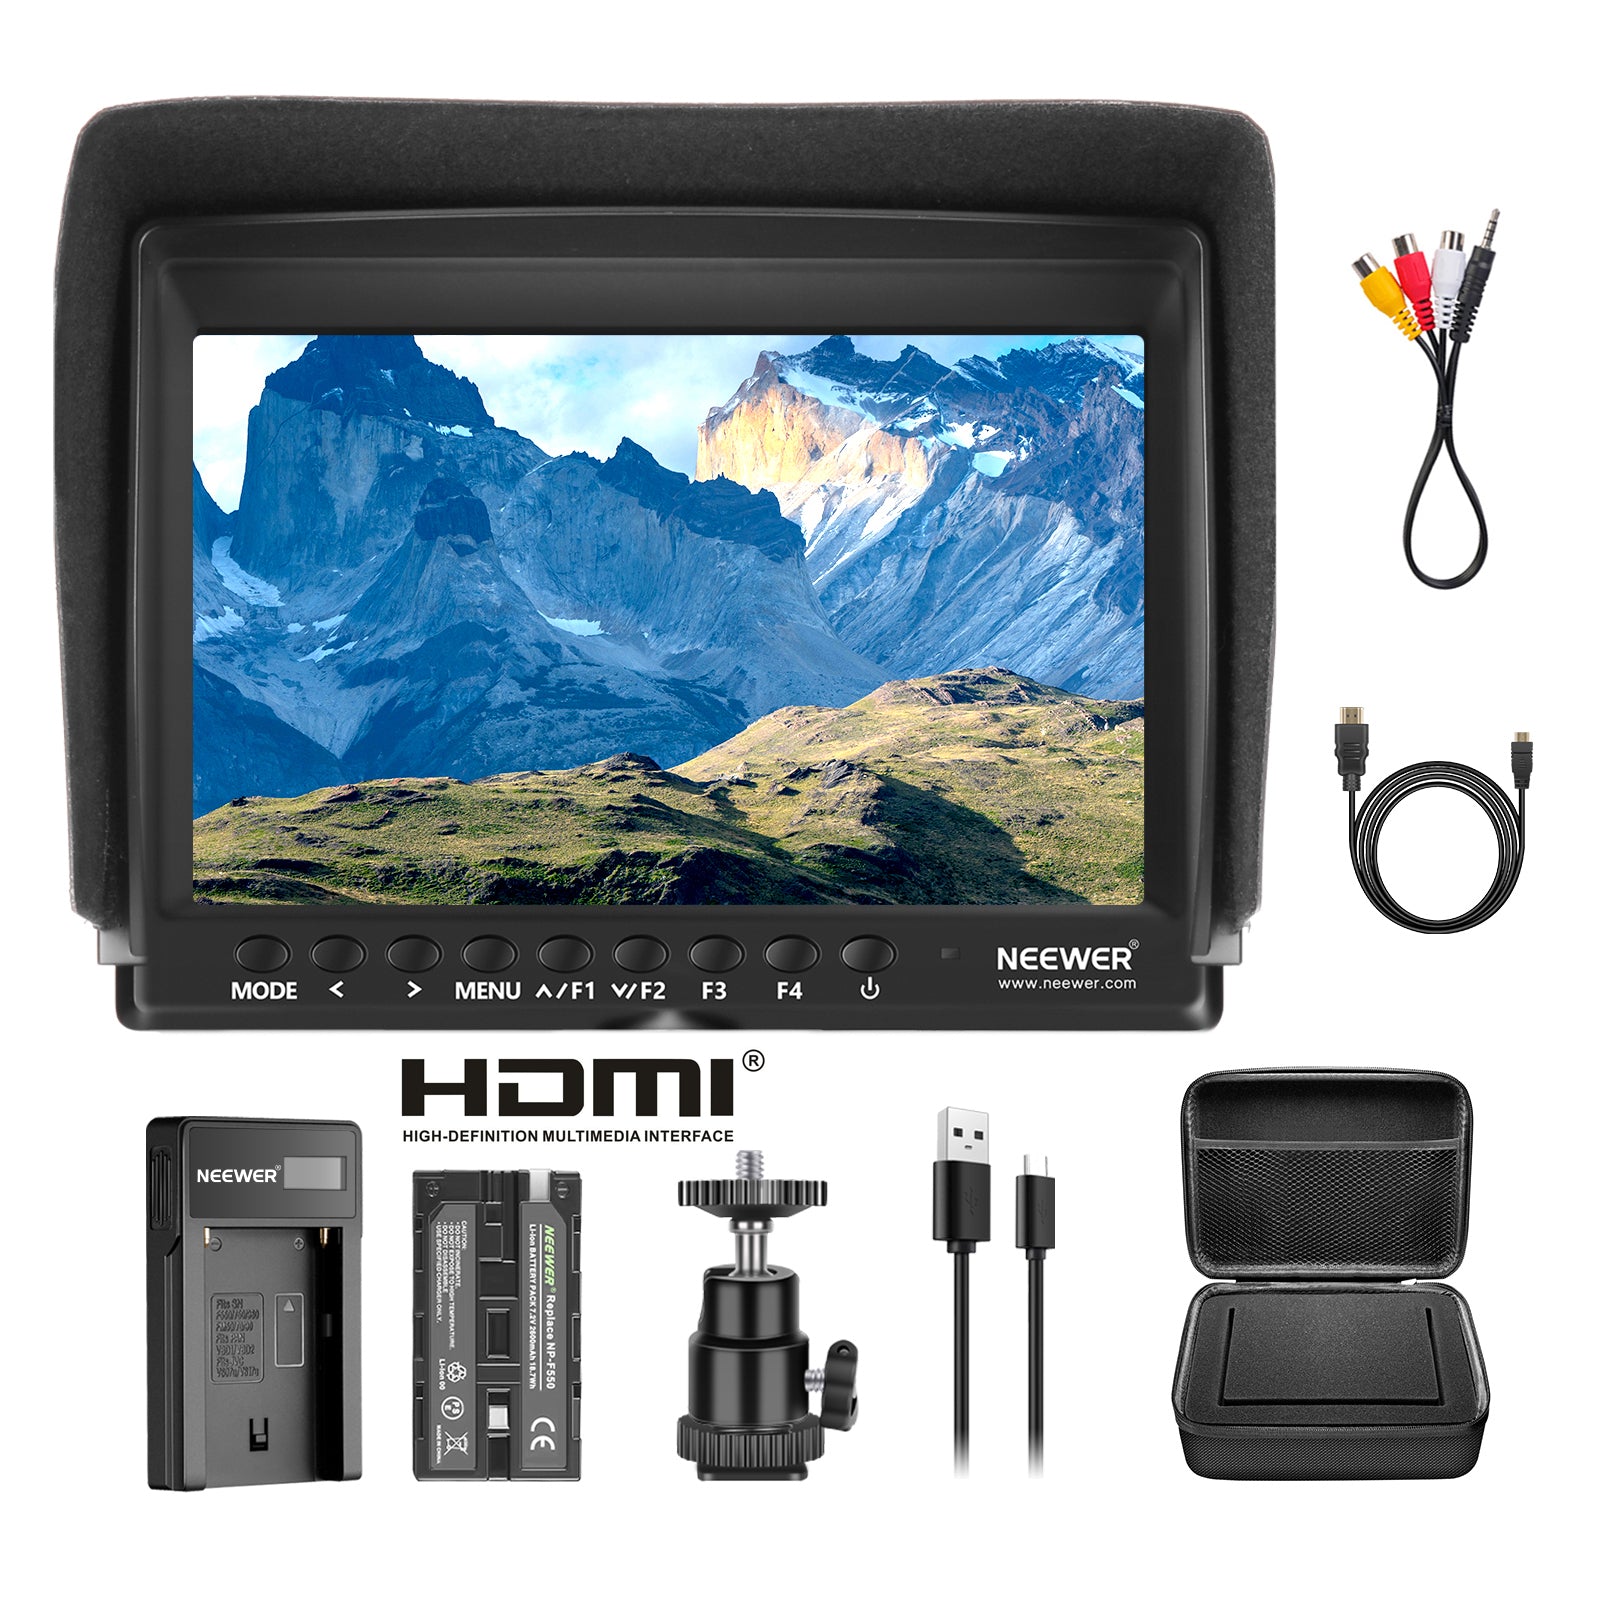 NEEWER F100 7 Inch HD Camera Field Monitor Kit With Case